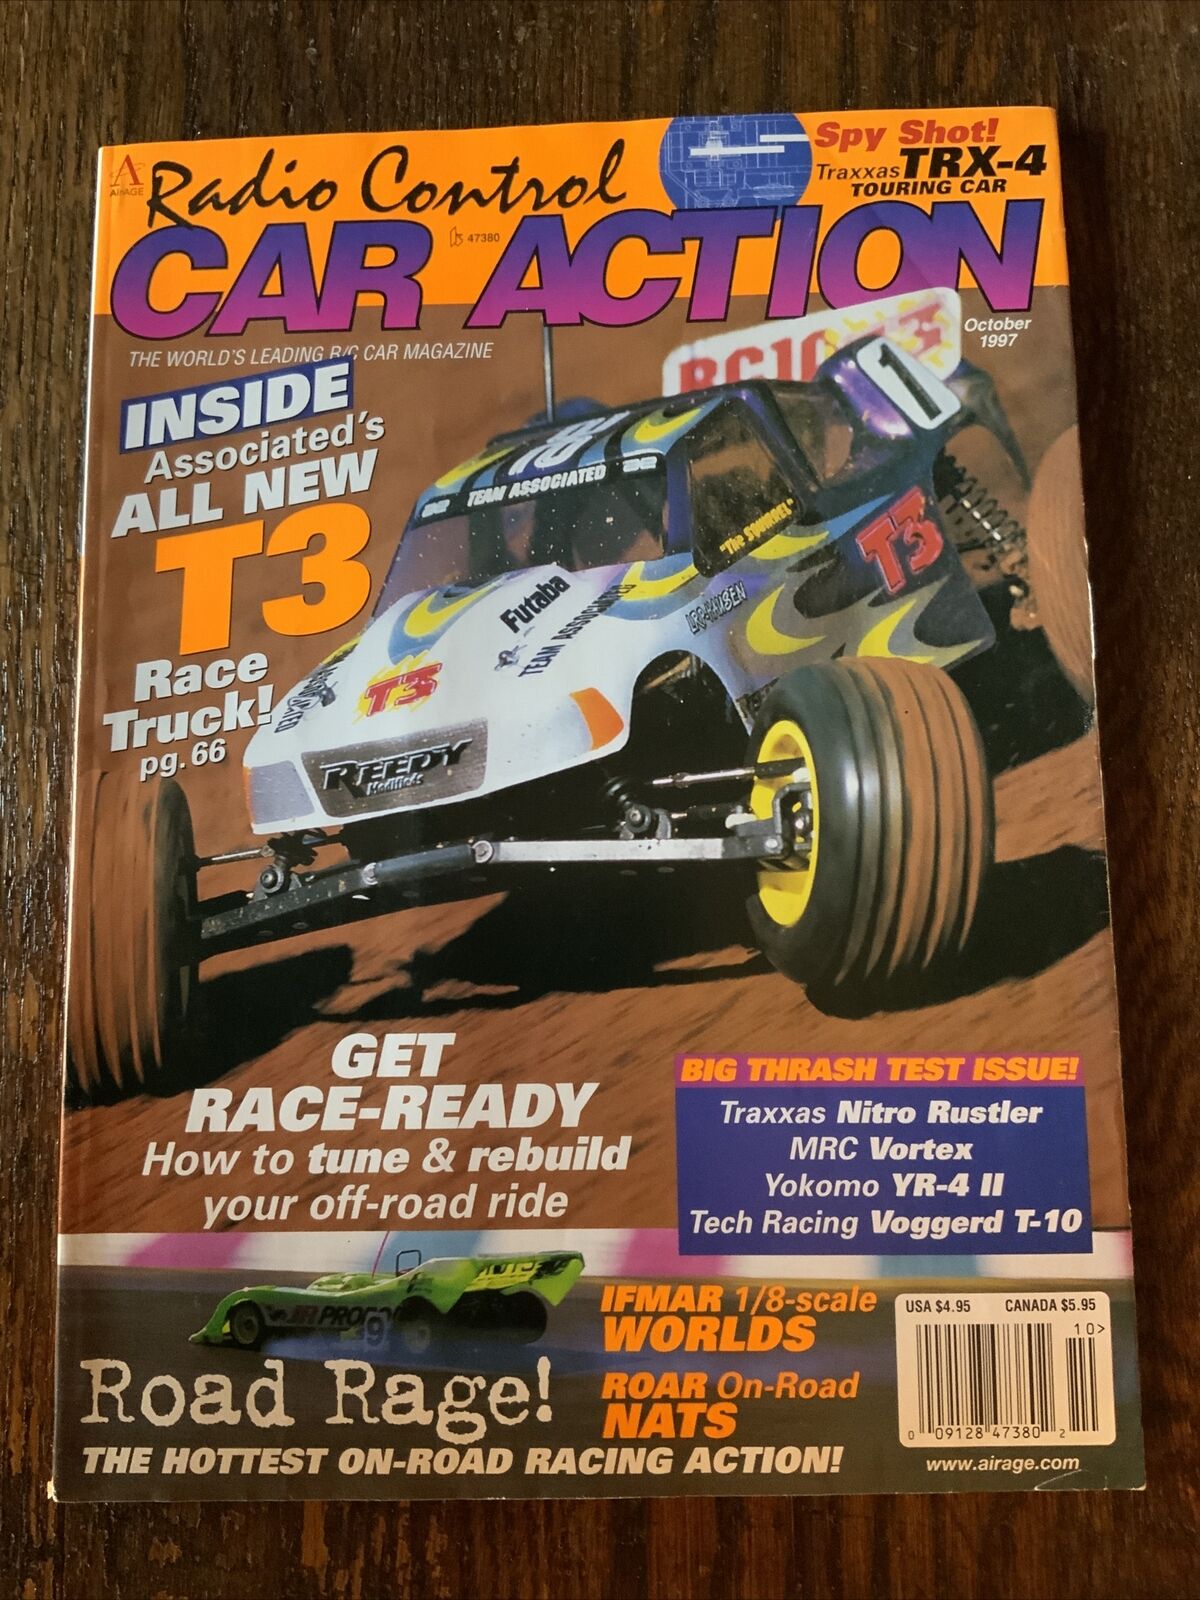 Vintage Radio Control Car Action Oct 1997 Inside Associated’s T3 IFMAR 1/8 WORLD